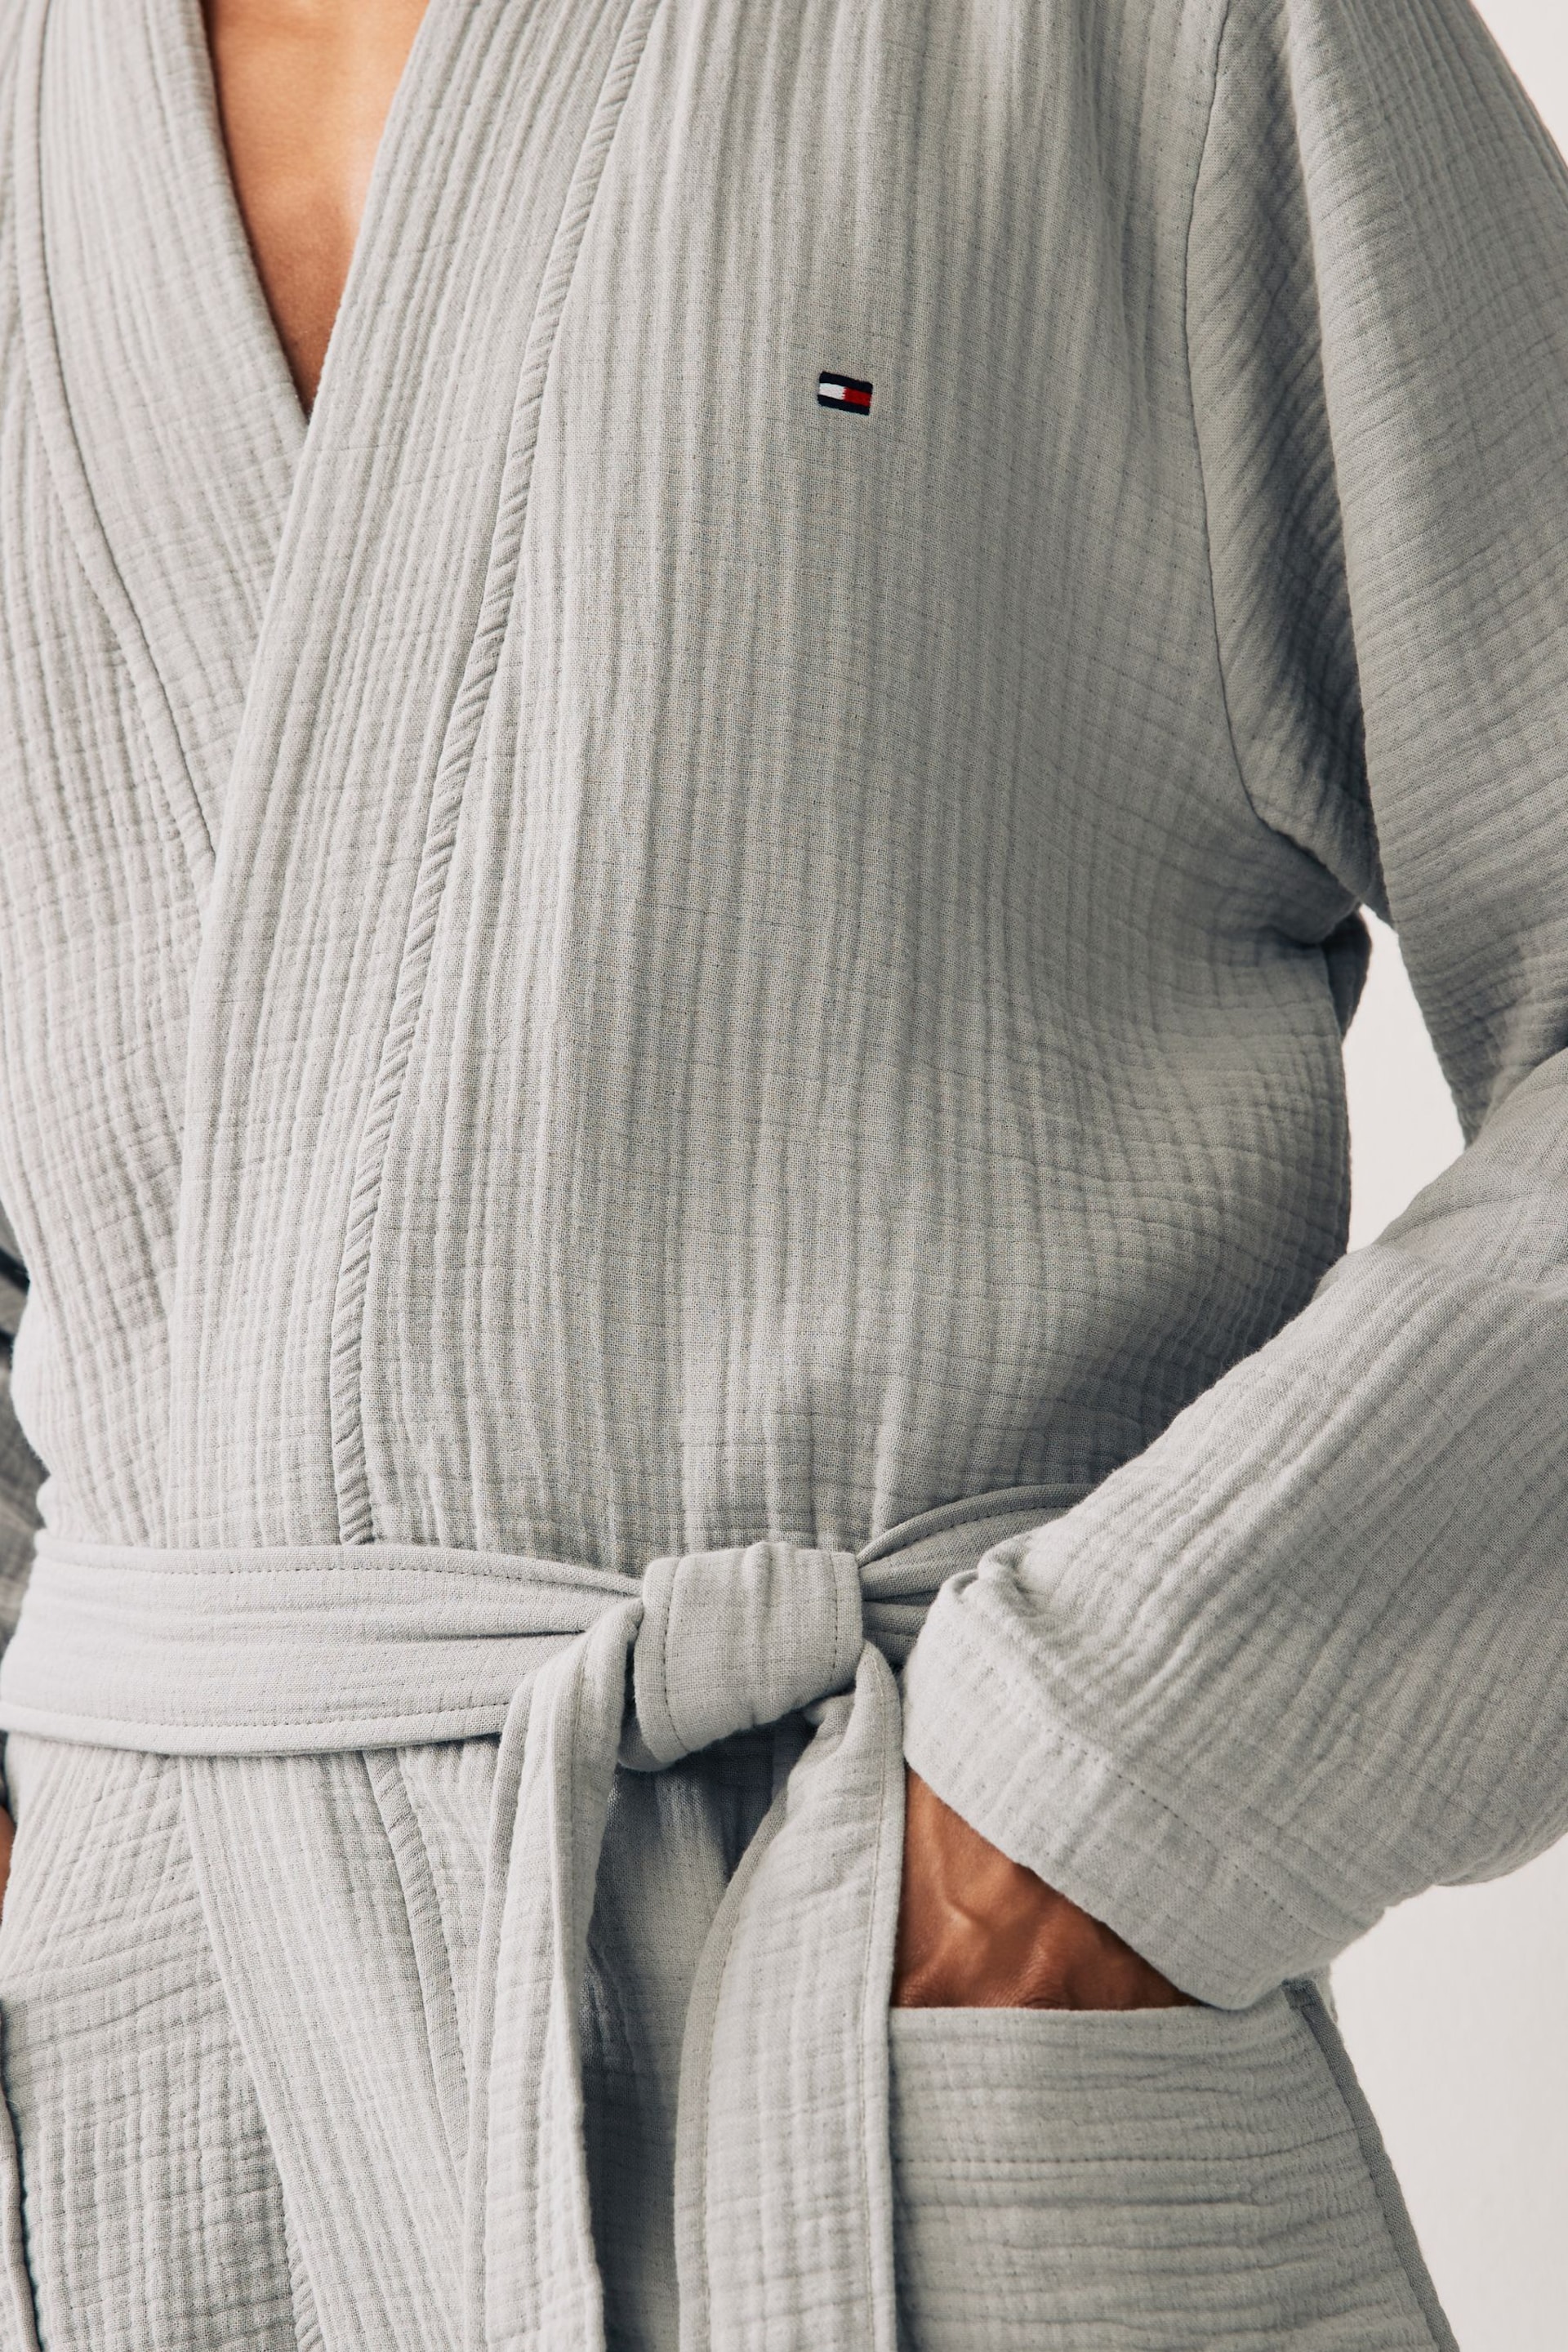 Tommy Hilfiger Grey Woven Robe - Image 4 of 5